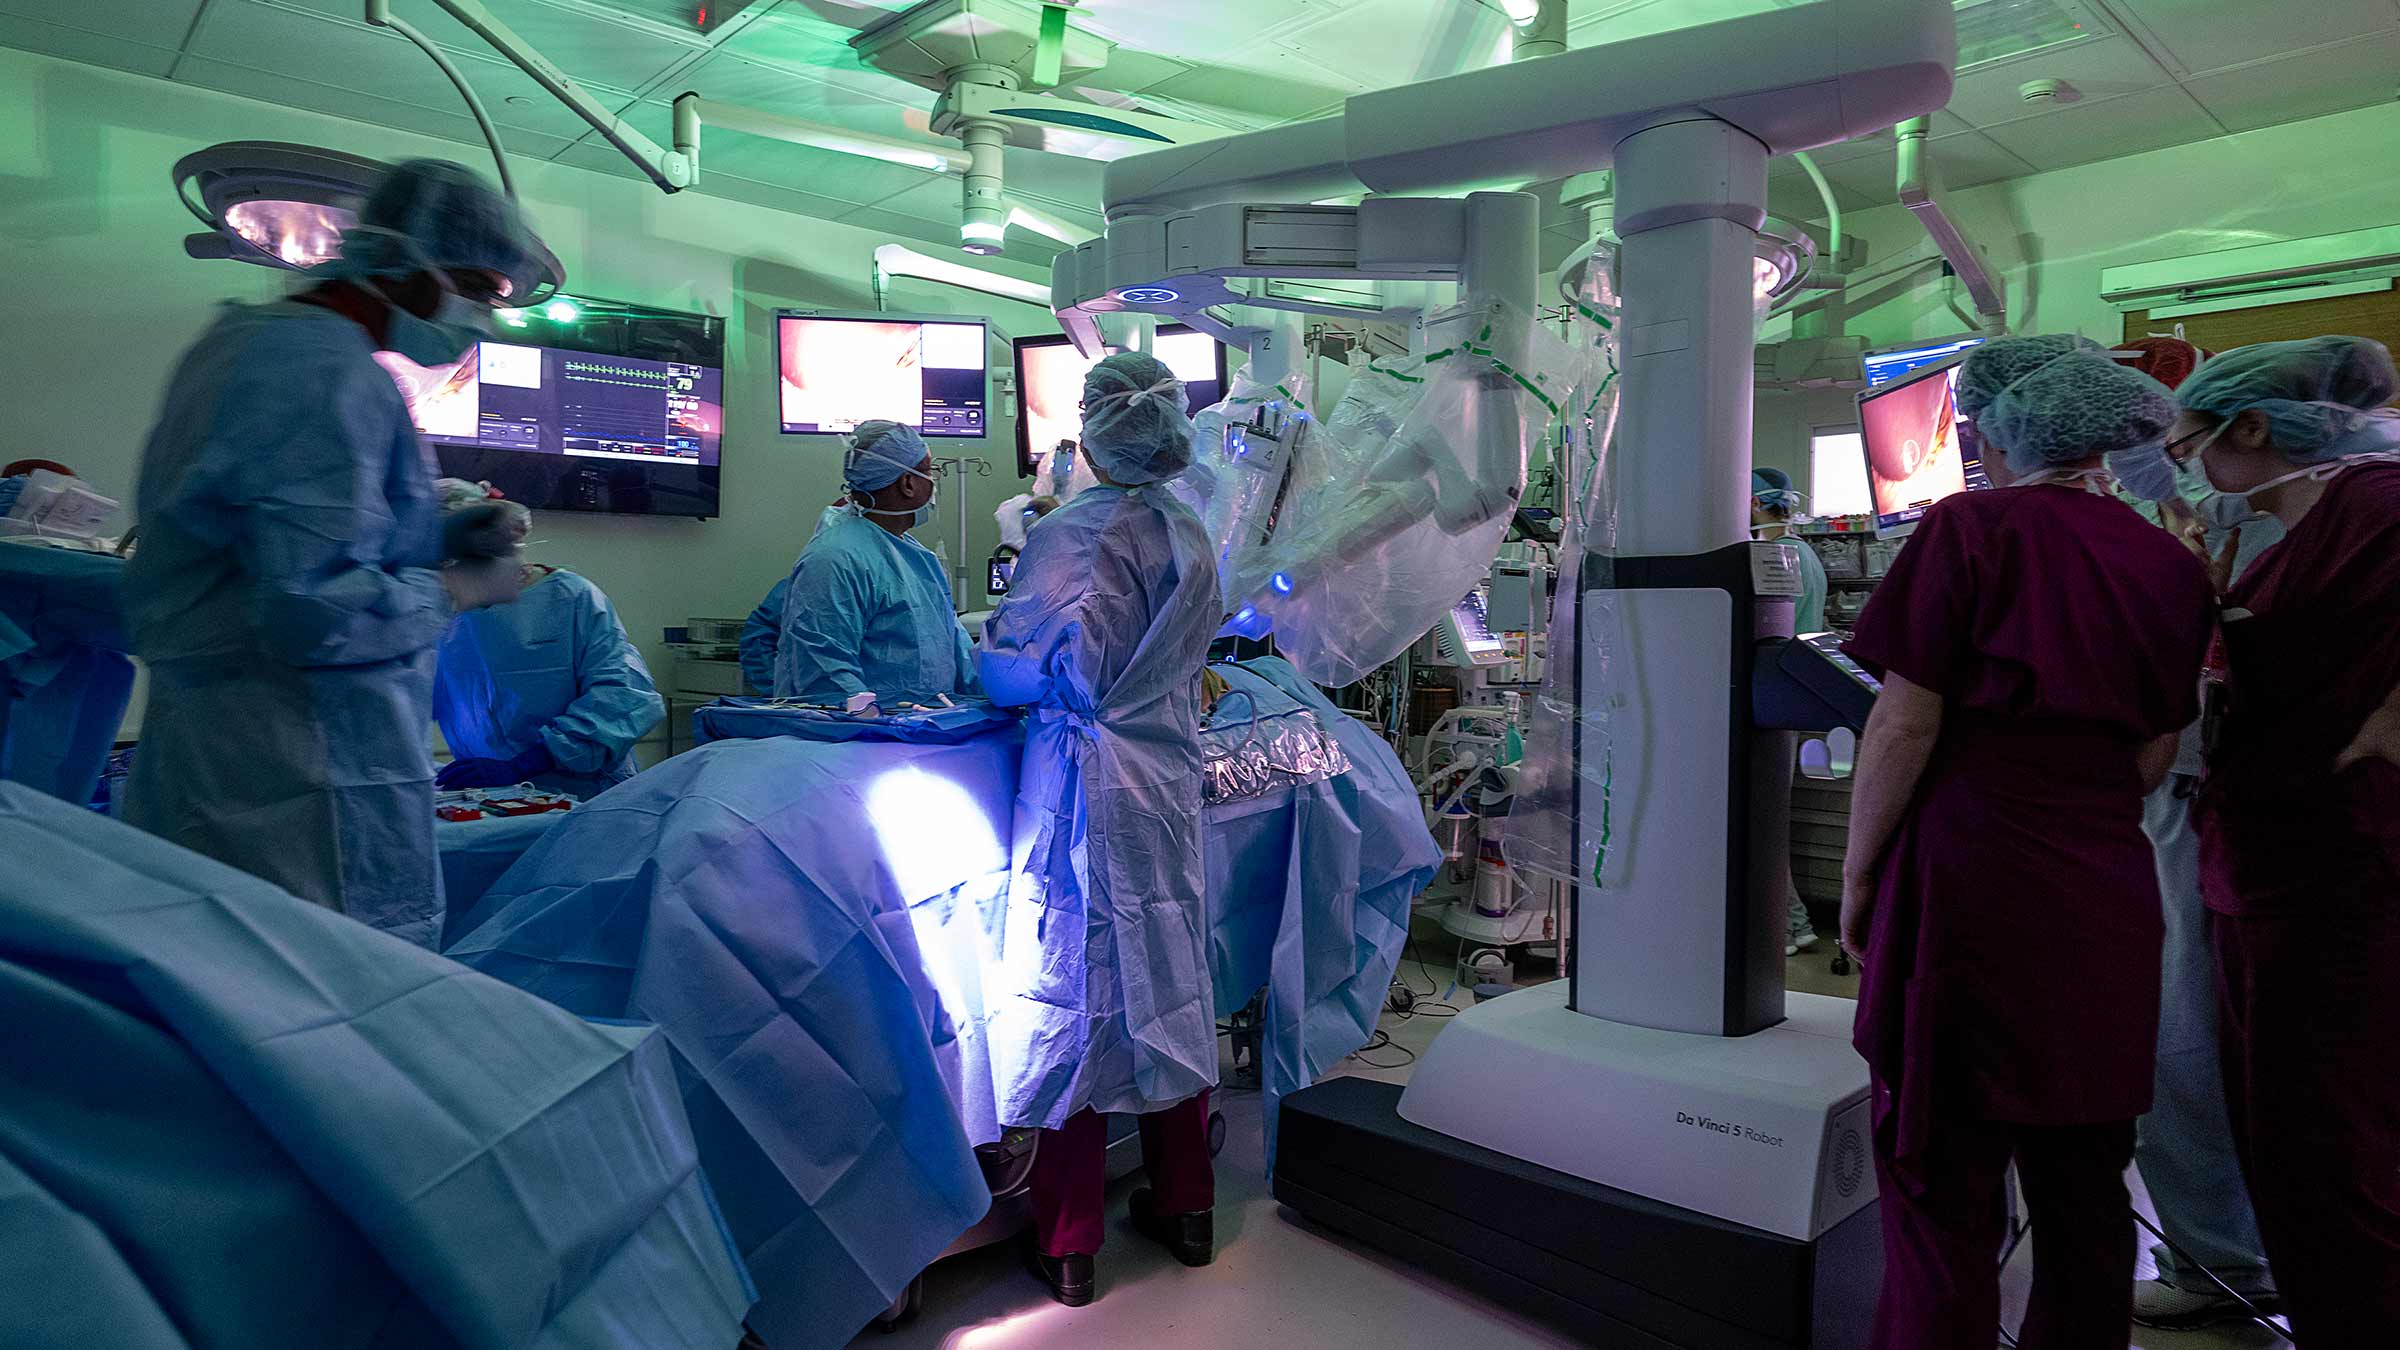 The da Vinci 5 robot and a surgical team in the OR